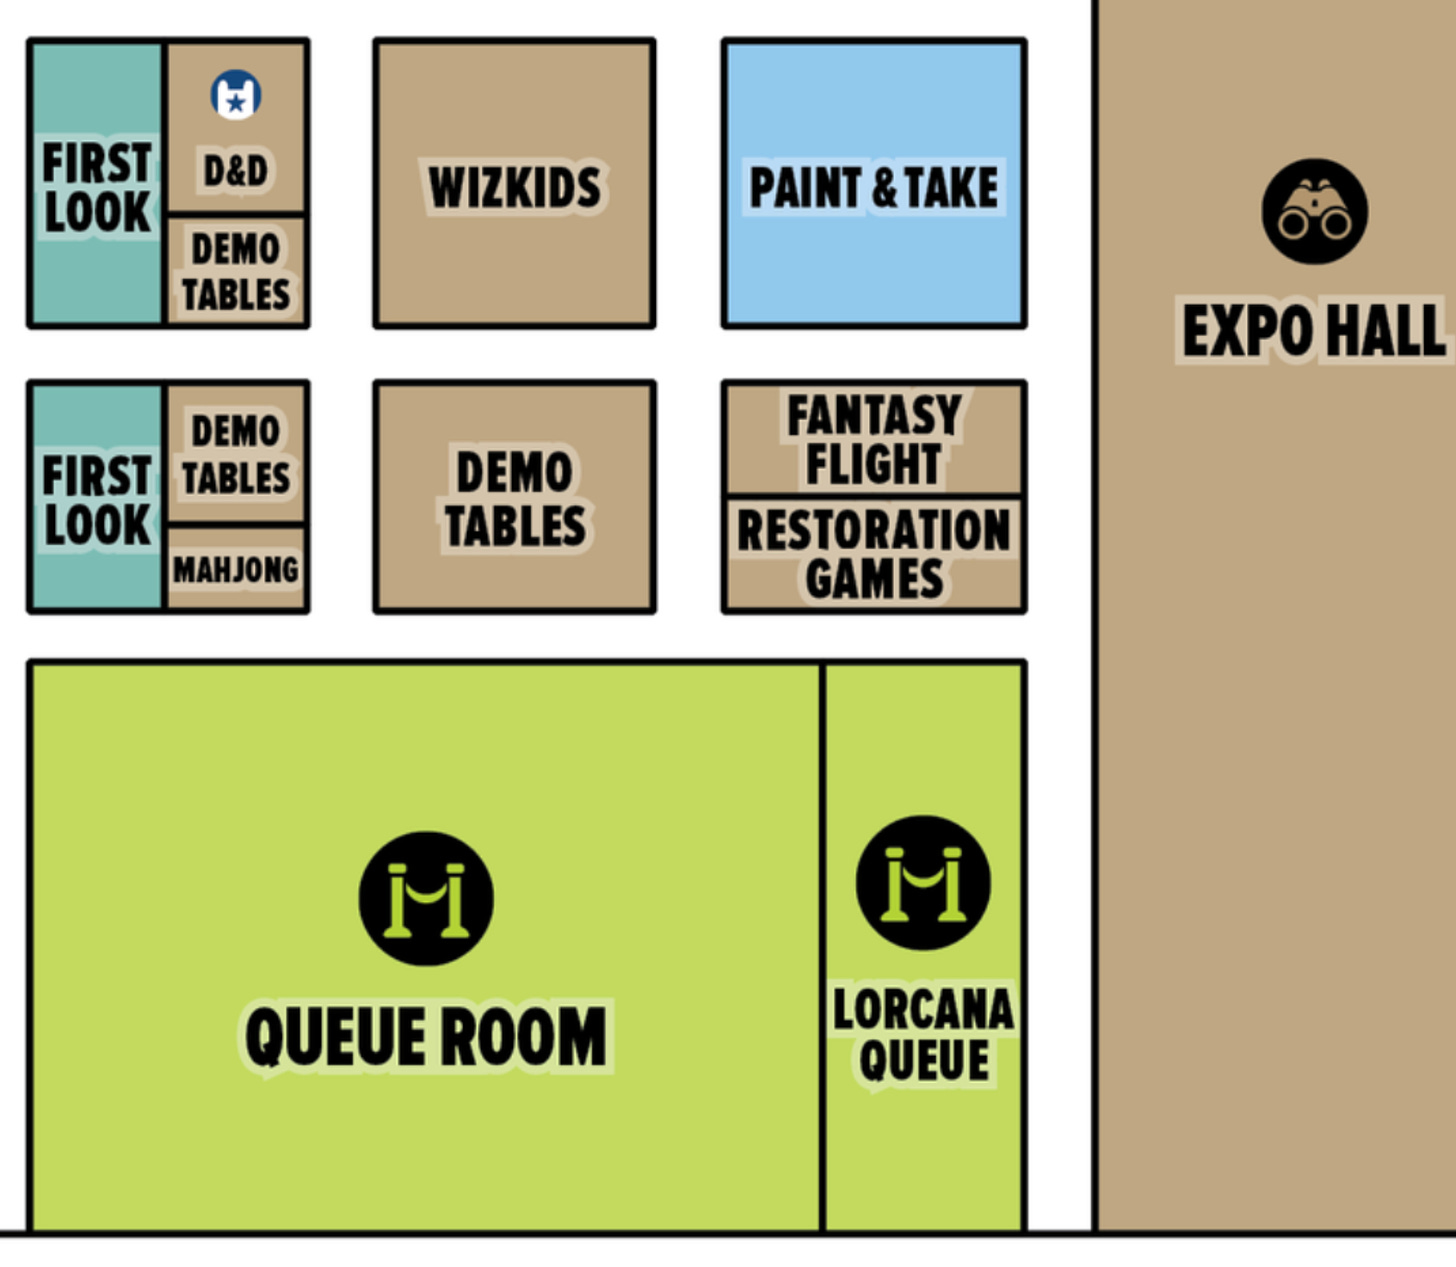 A portion of the map of the PAX Unplugged game convention, where some areas are marked for D&D, Wizkids, First Look, but the Expo Hall does not have individual booths marked. The largest area pictured is the Queue Room, and 20% of the Queue Room is separately marked Lorcana Queue.